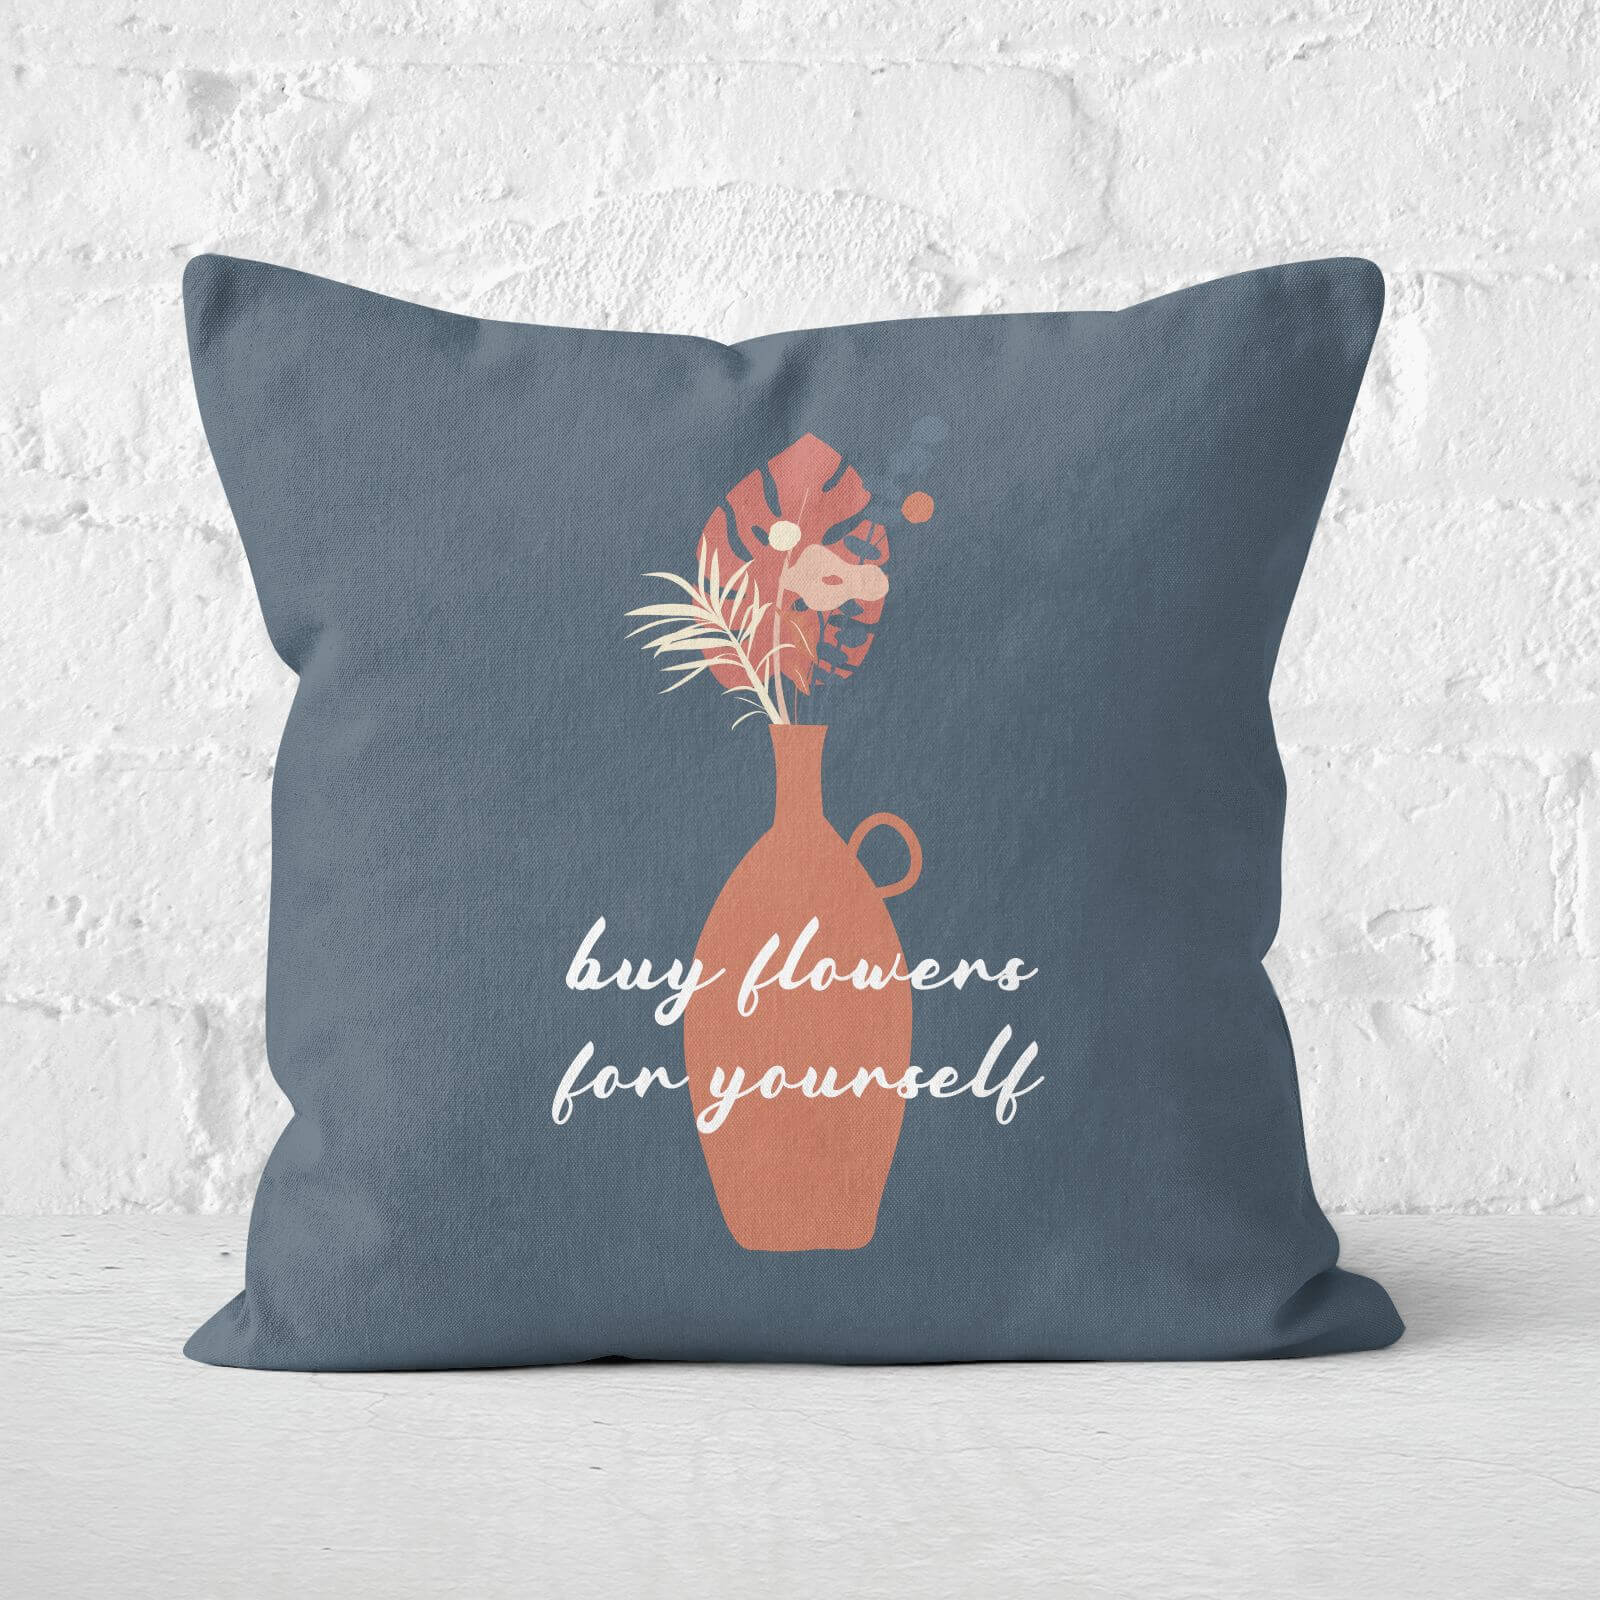 Buy Flowers For Yourself Square Cushion - 60x60cm - Soft Touch